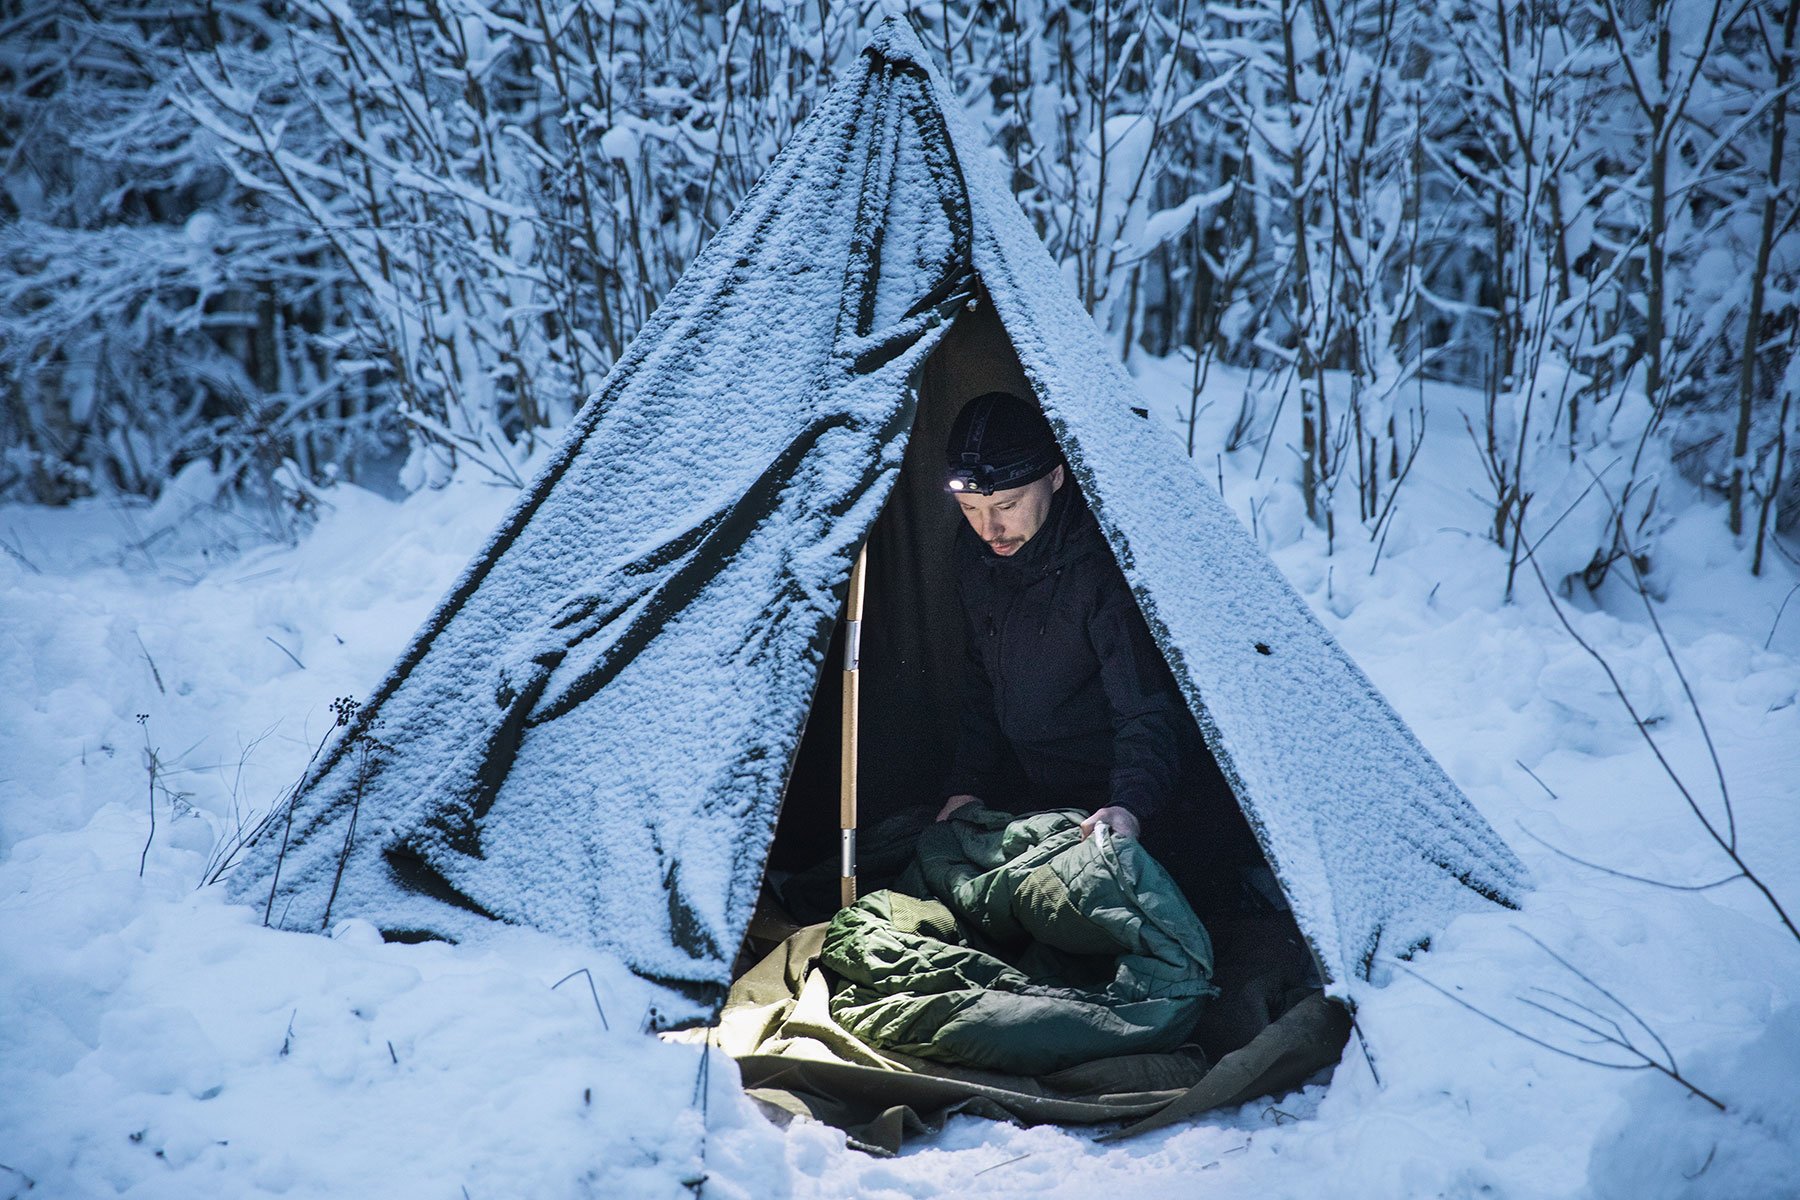 A person inside the tent in a wintry forest edge opening their sleeping bag.